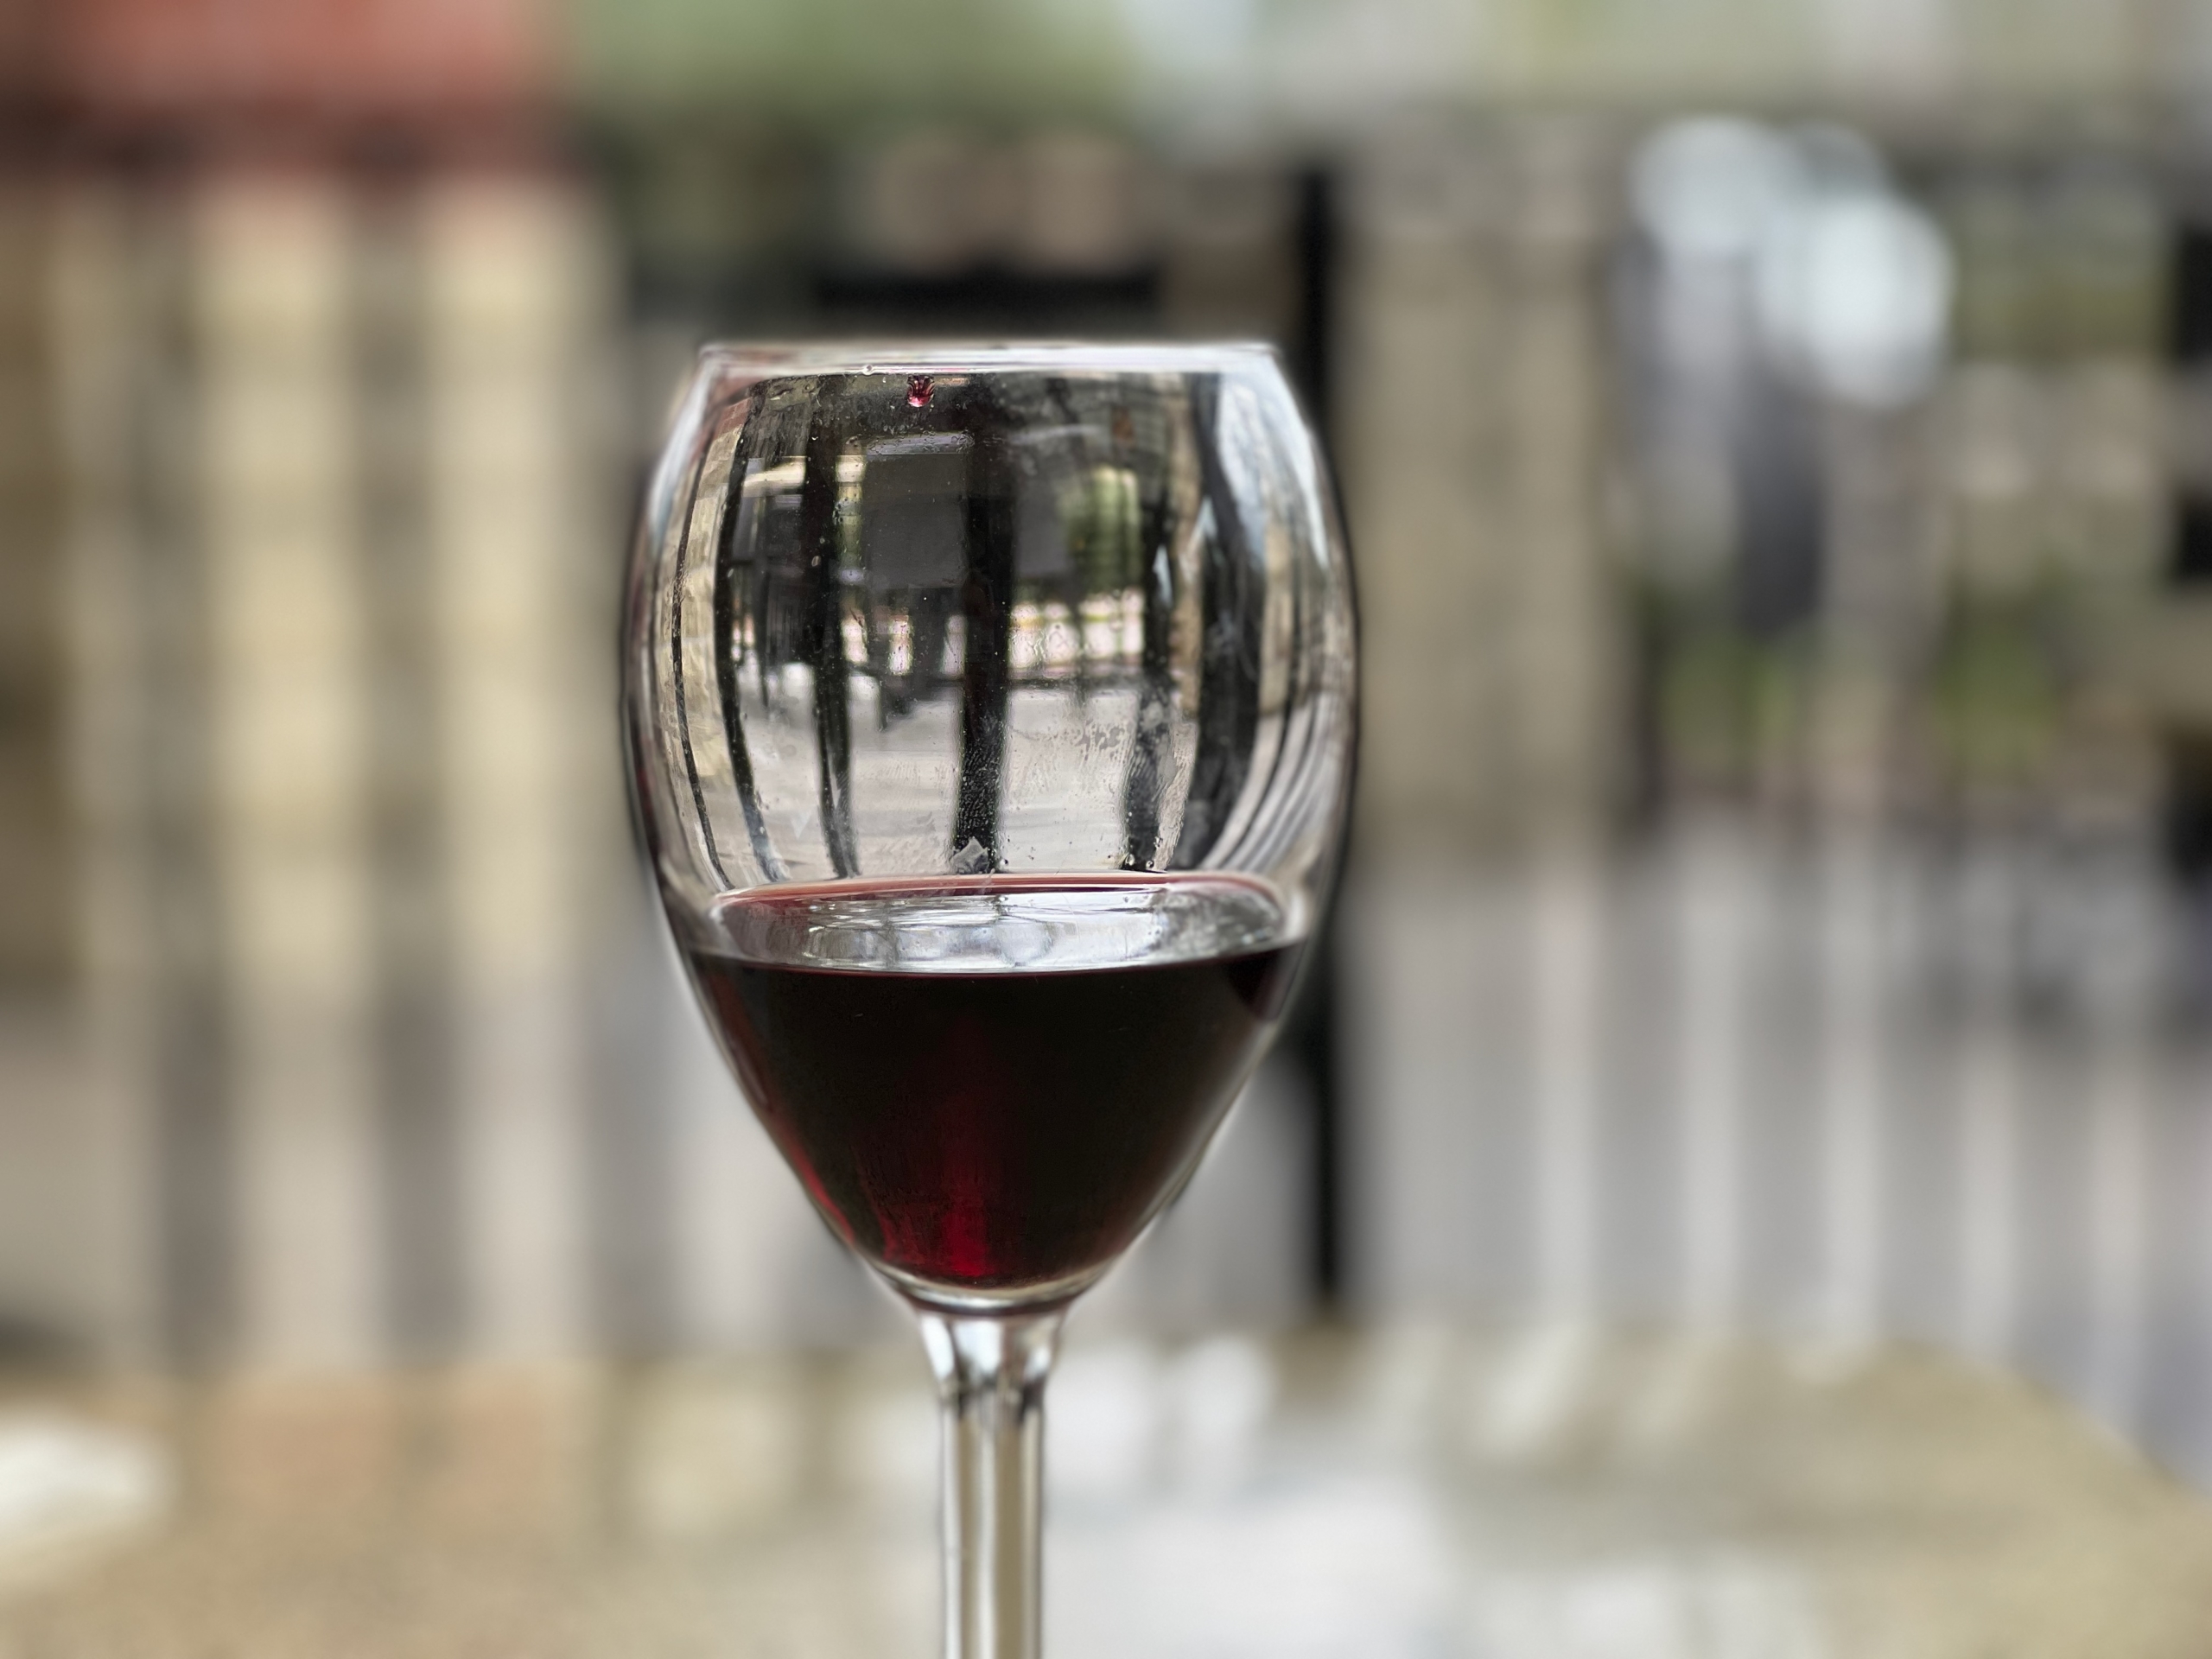 A glass of red wine; he fence in the background blurred but clearly seen through the glass